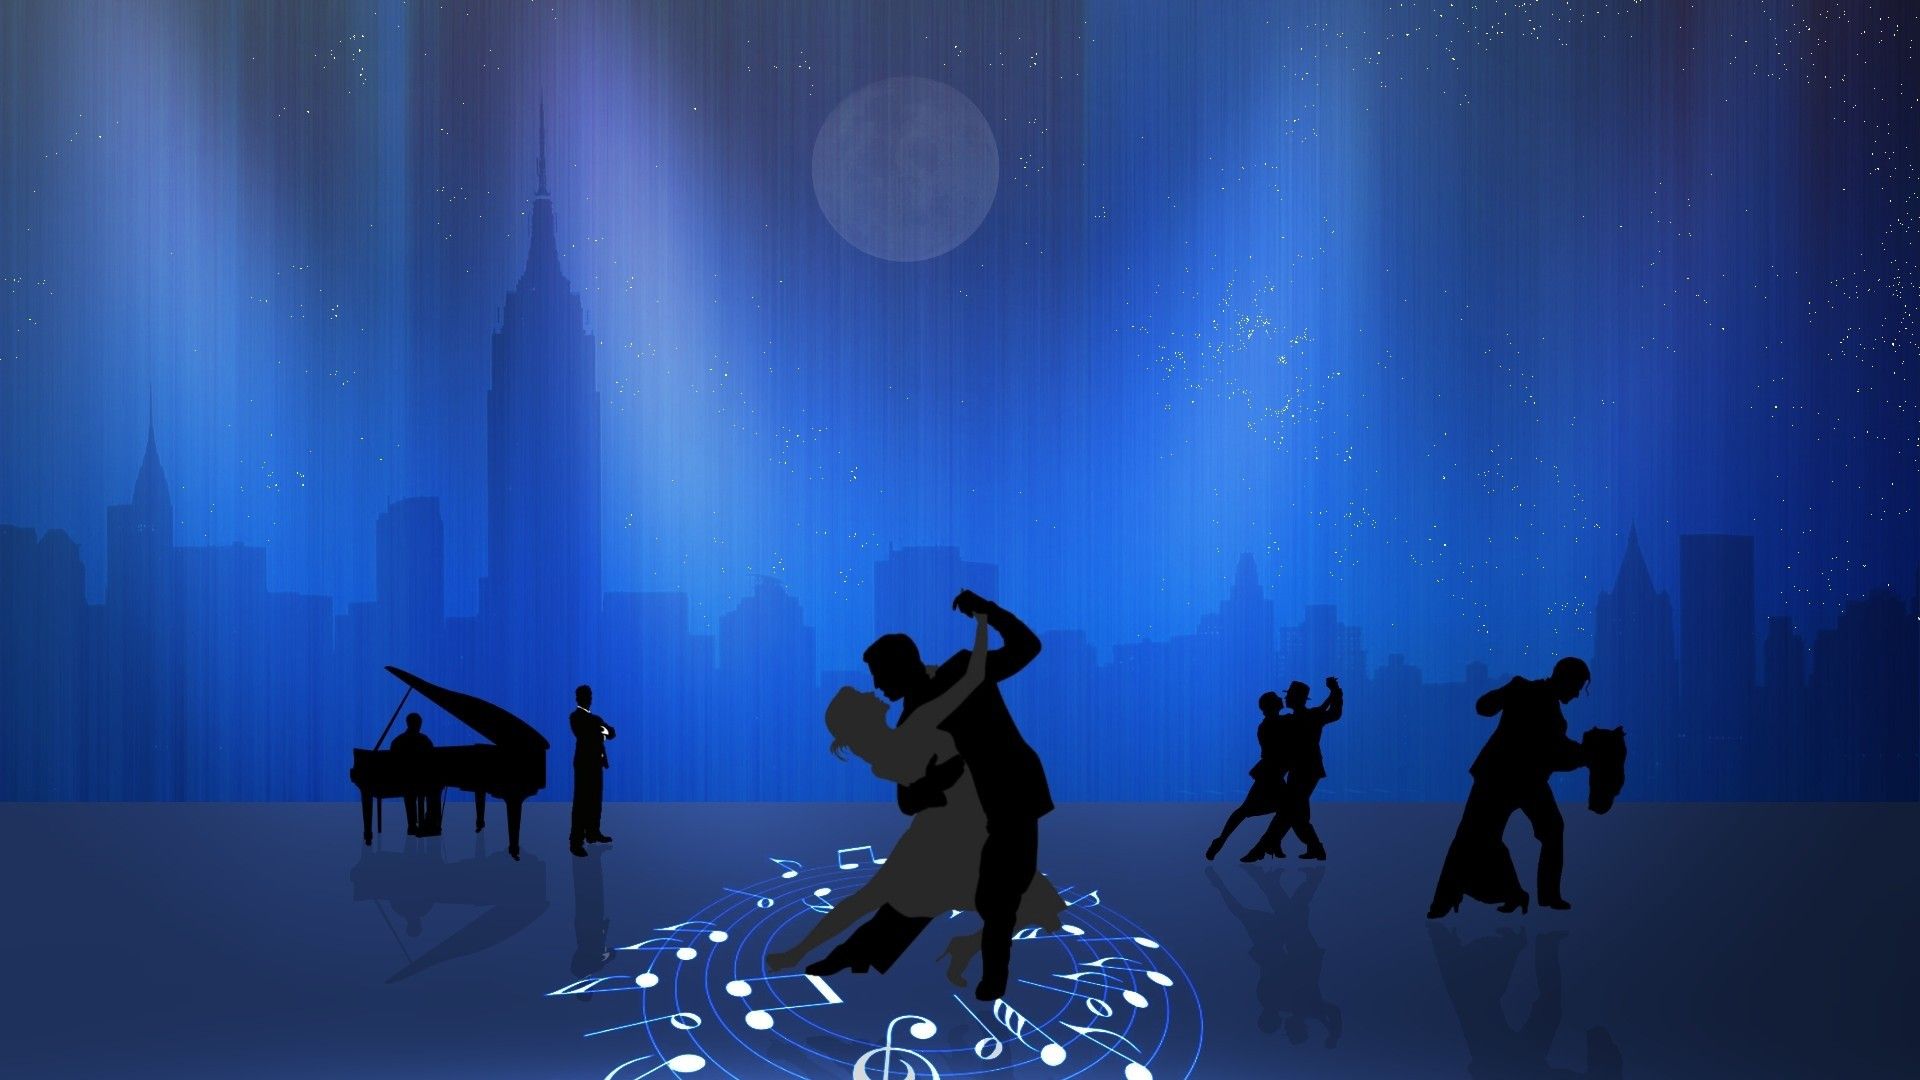 Dance the night city wallpaper and image, picture, photo